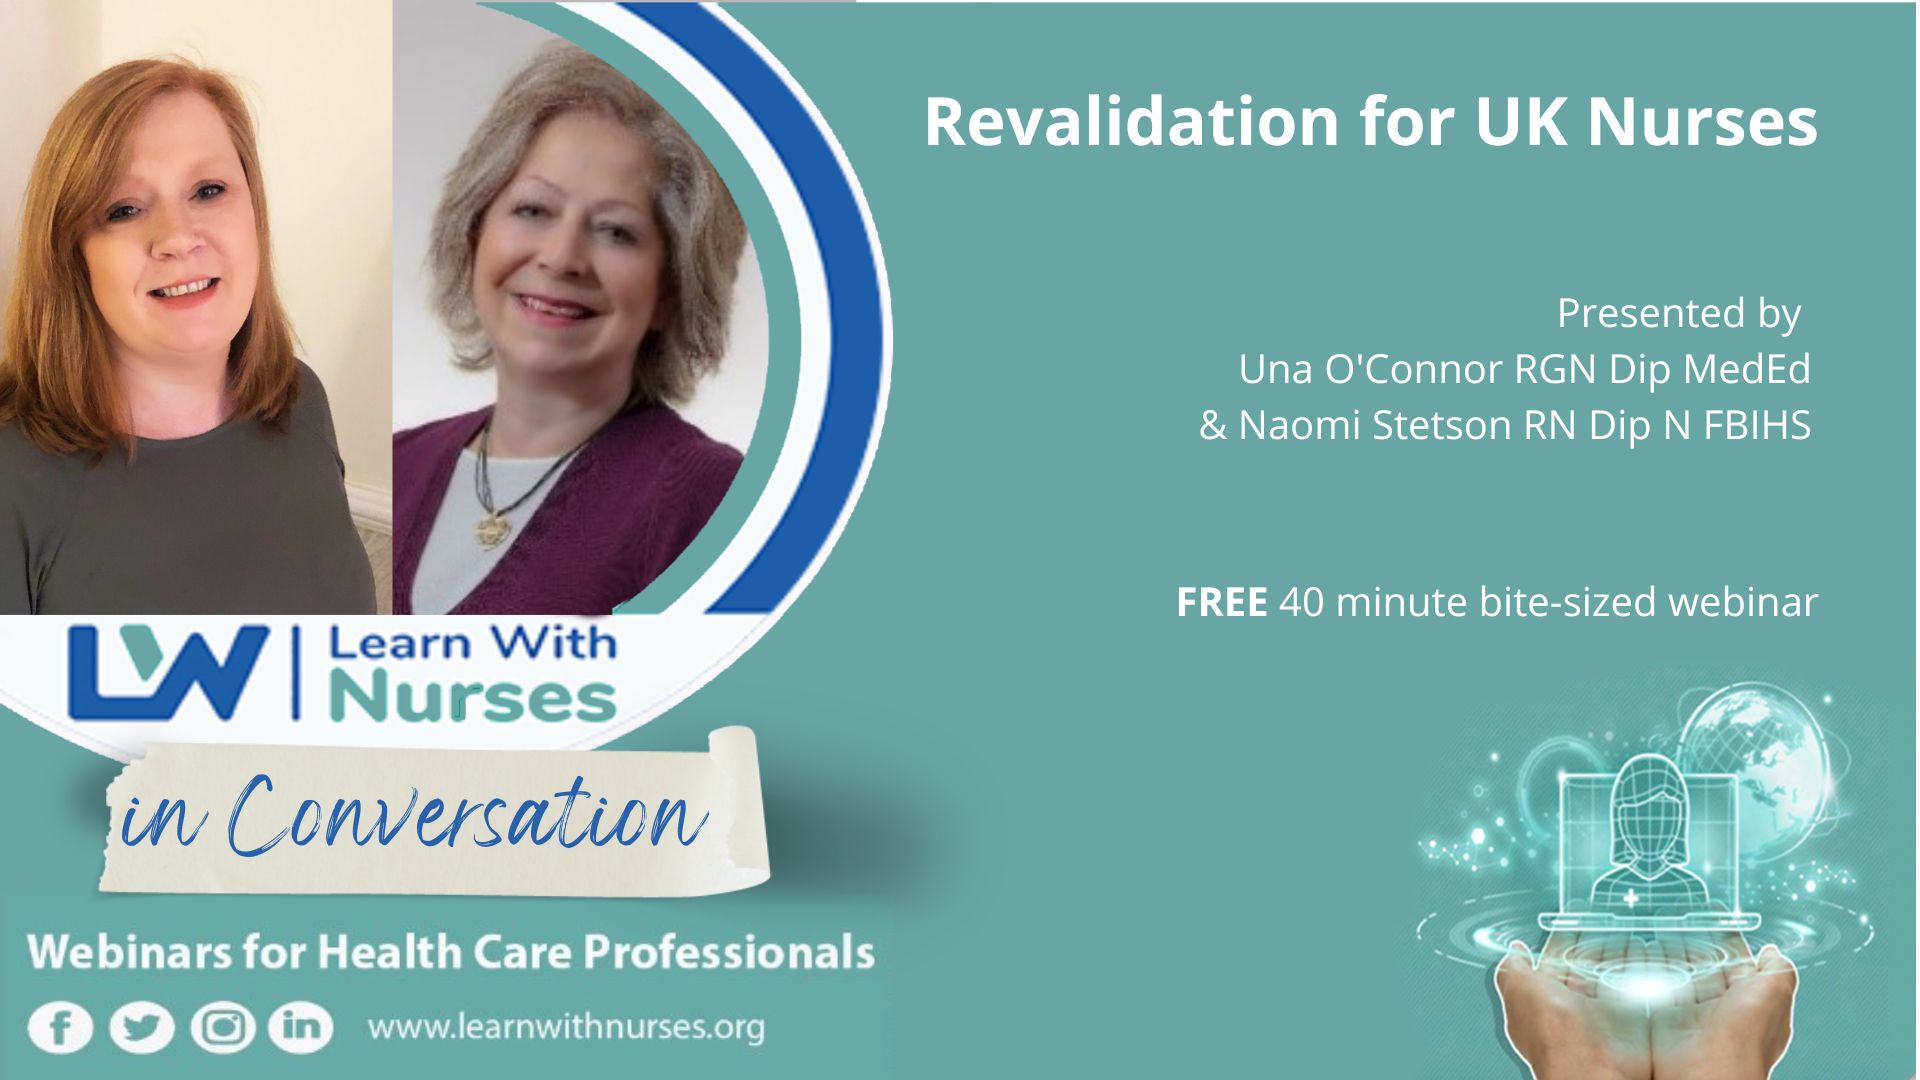 Revalidation for UK nurses presented by Una O'COnnor and Naomi Stetson